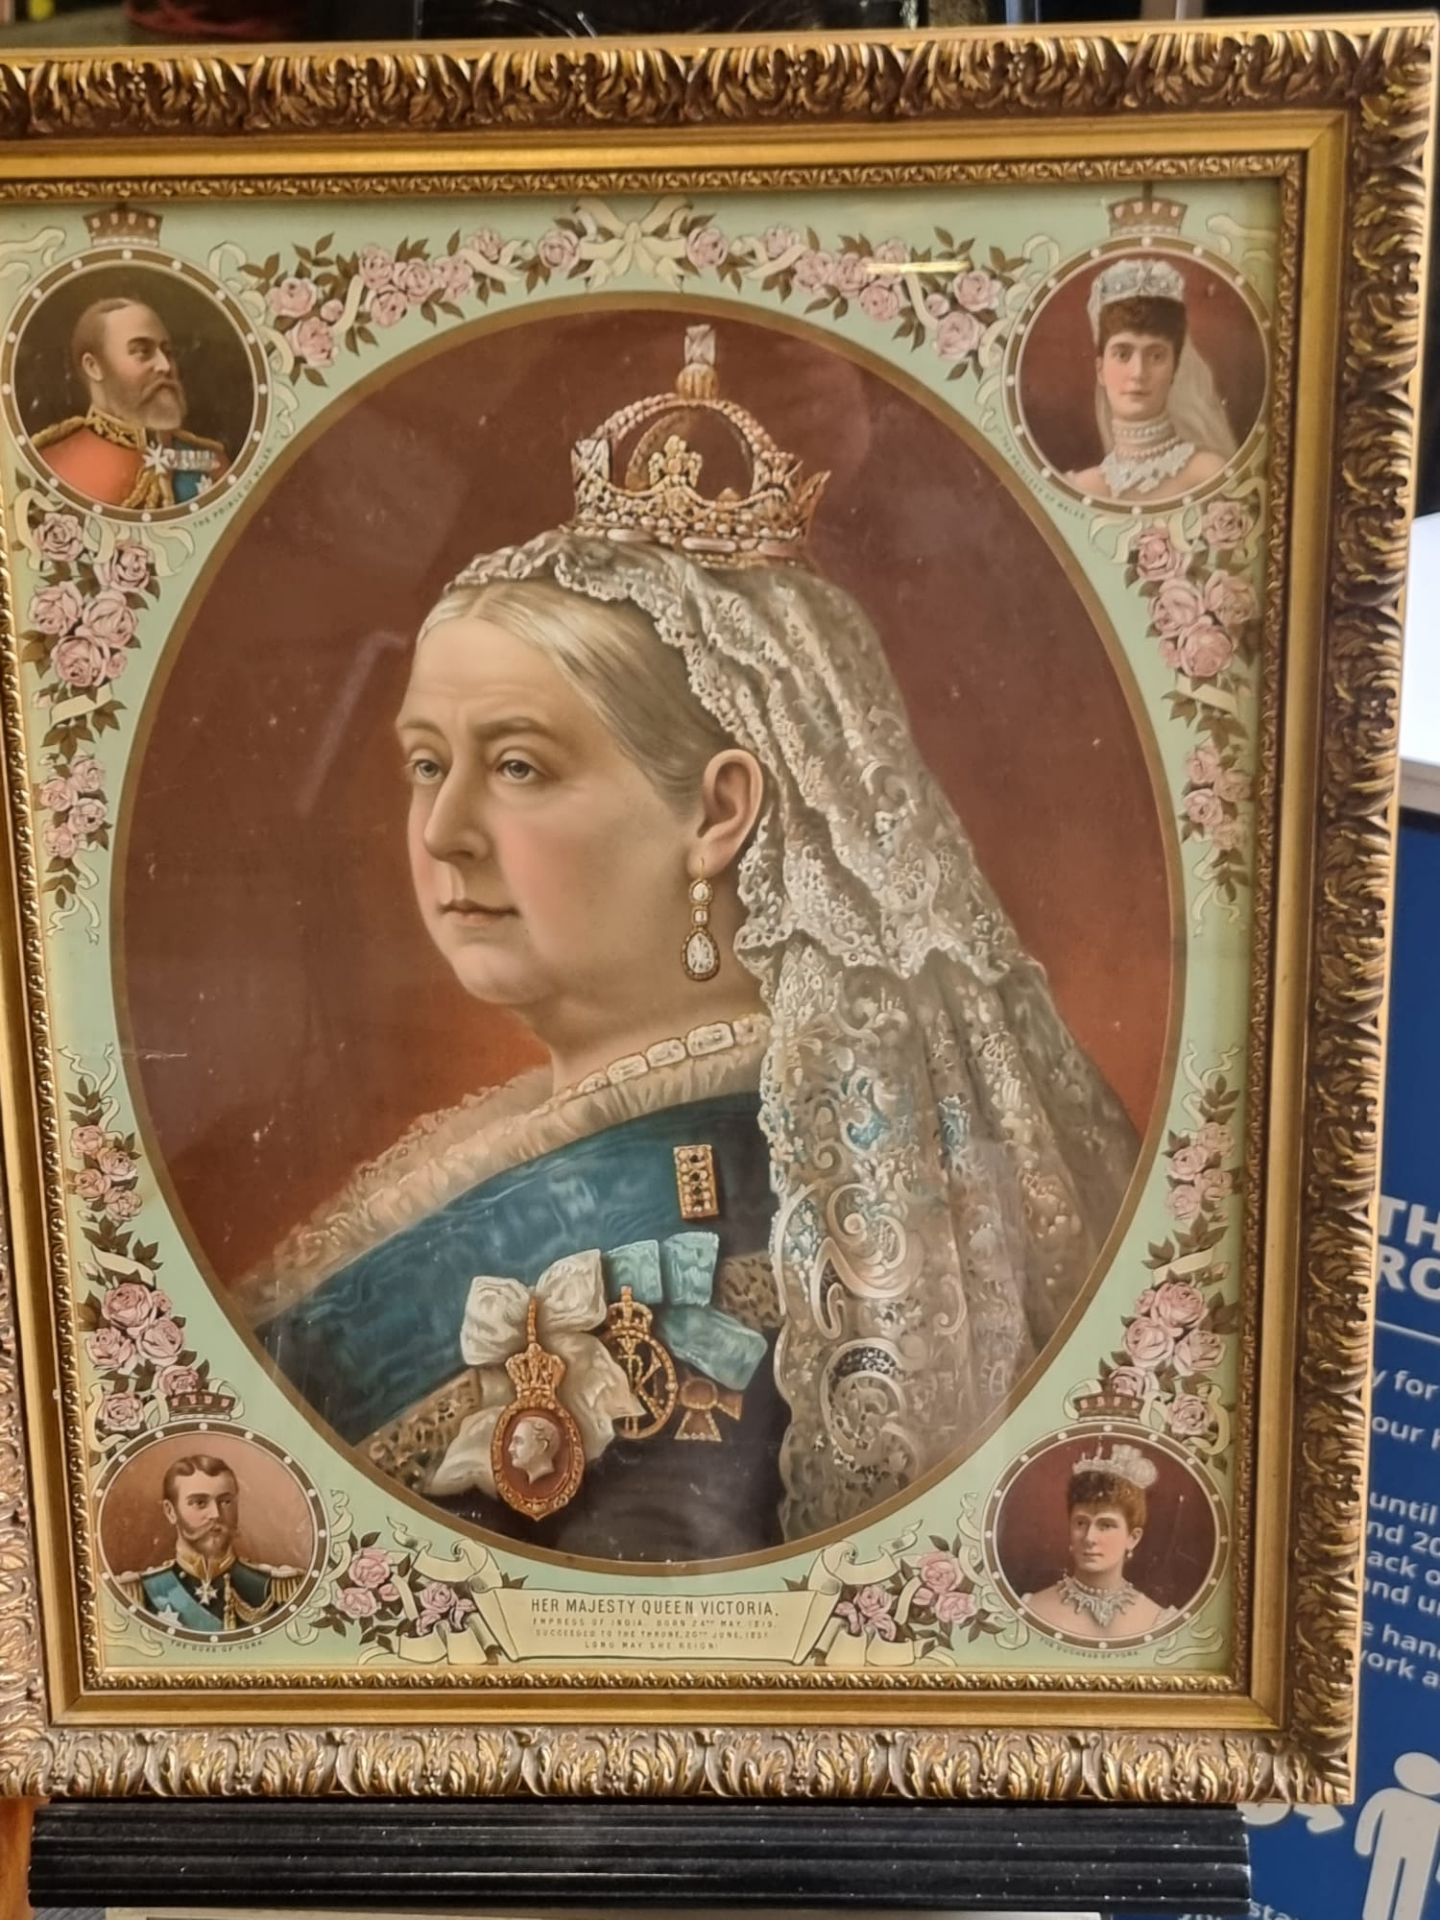 A Framed Print Of Queen Victoria With Inscription Plate Under Her Majesty Queen Victoria Empress - Image 9 of 9